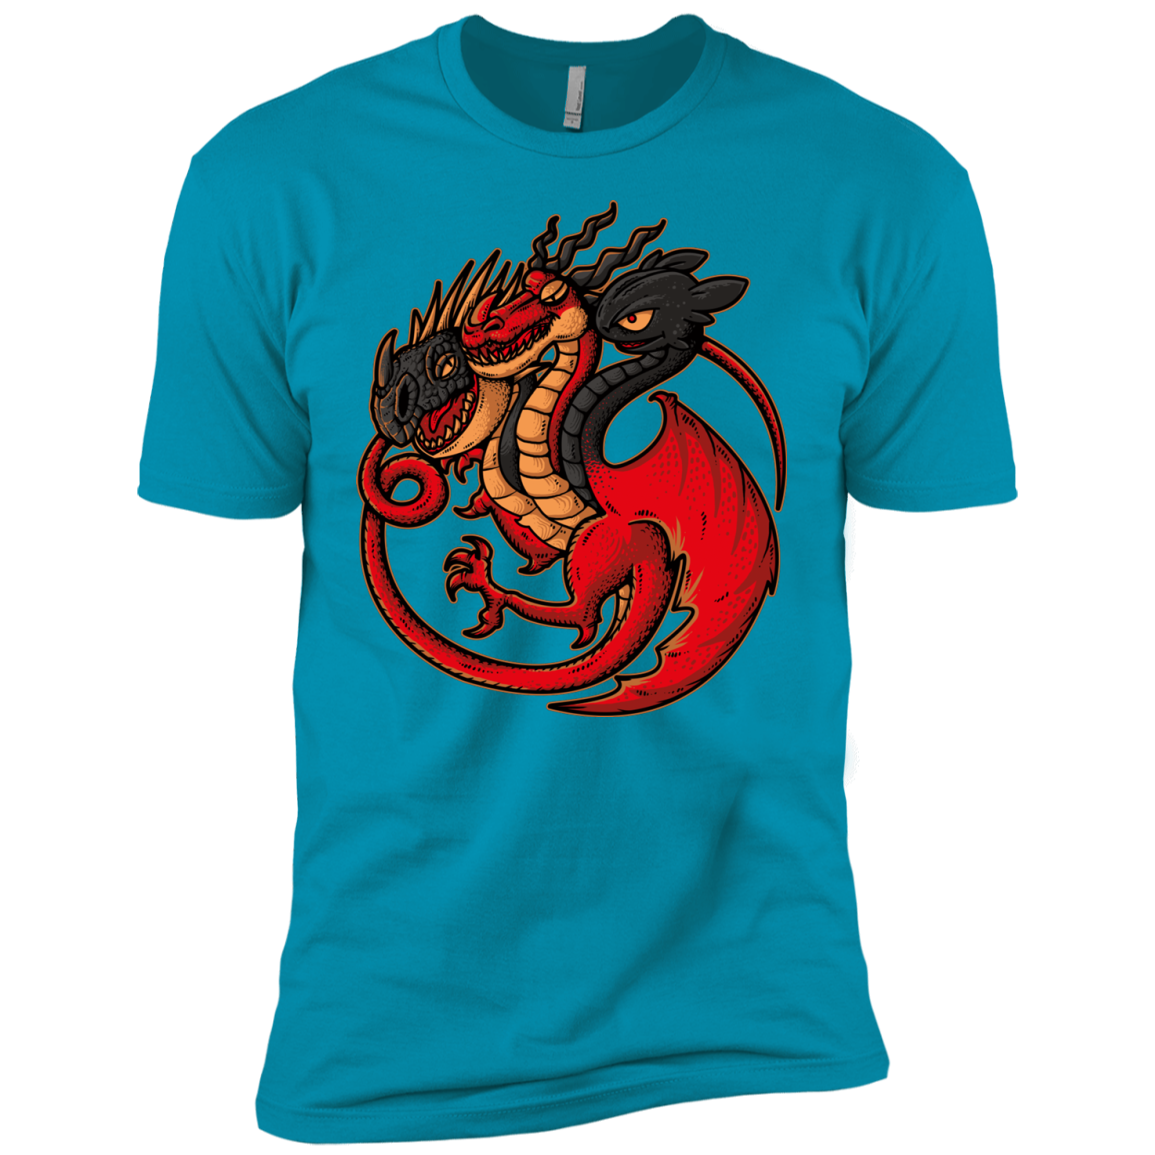 FIRE BLOOD AND TRAINING Boys Premium T-Shirt